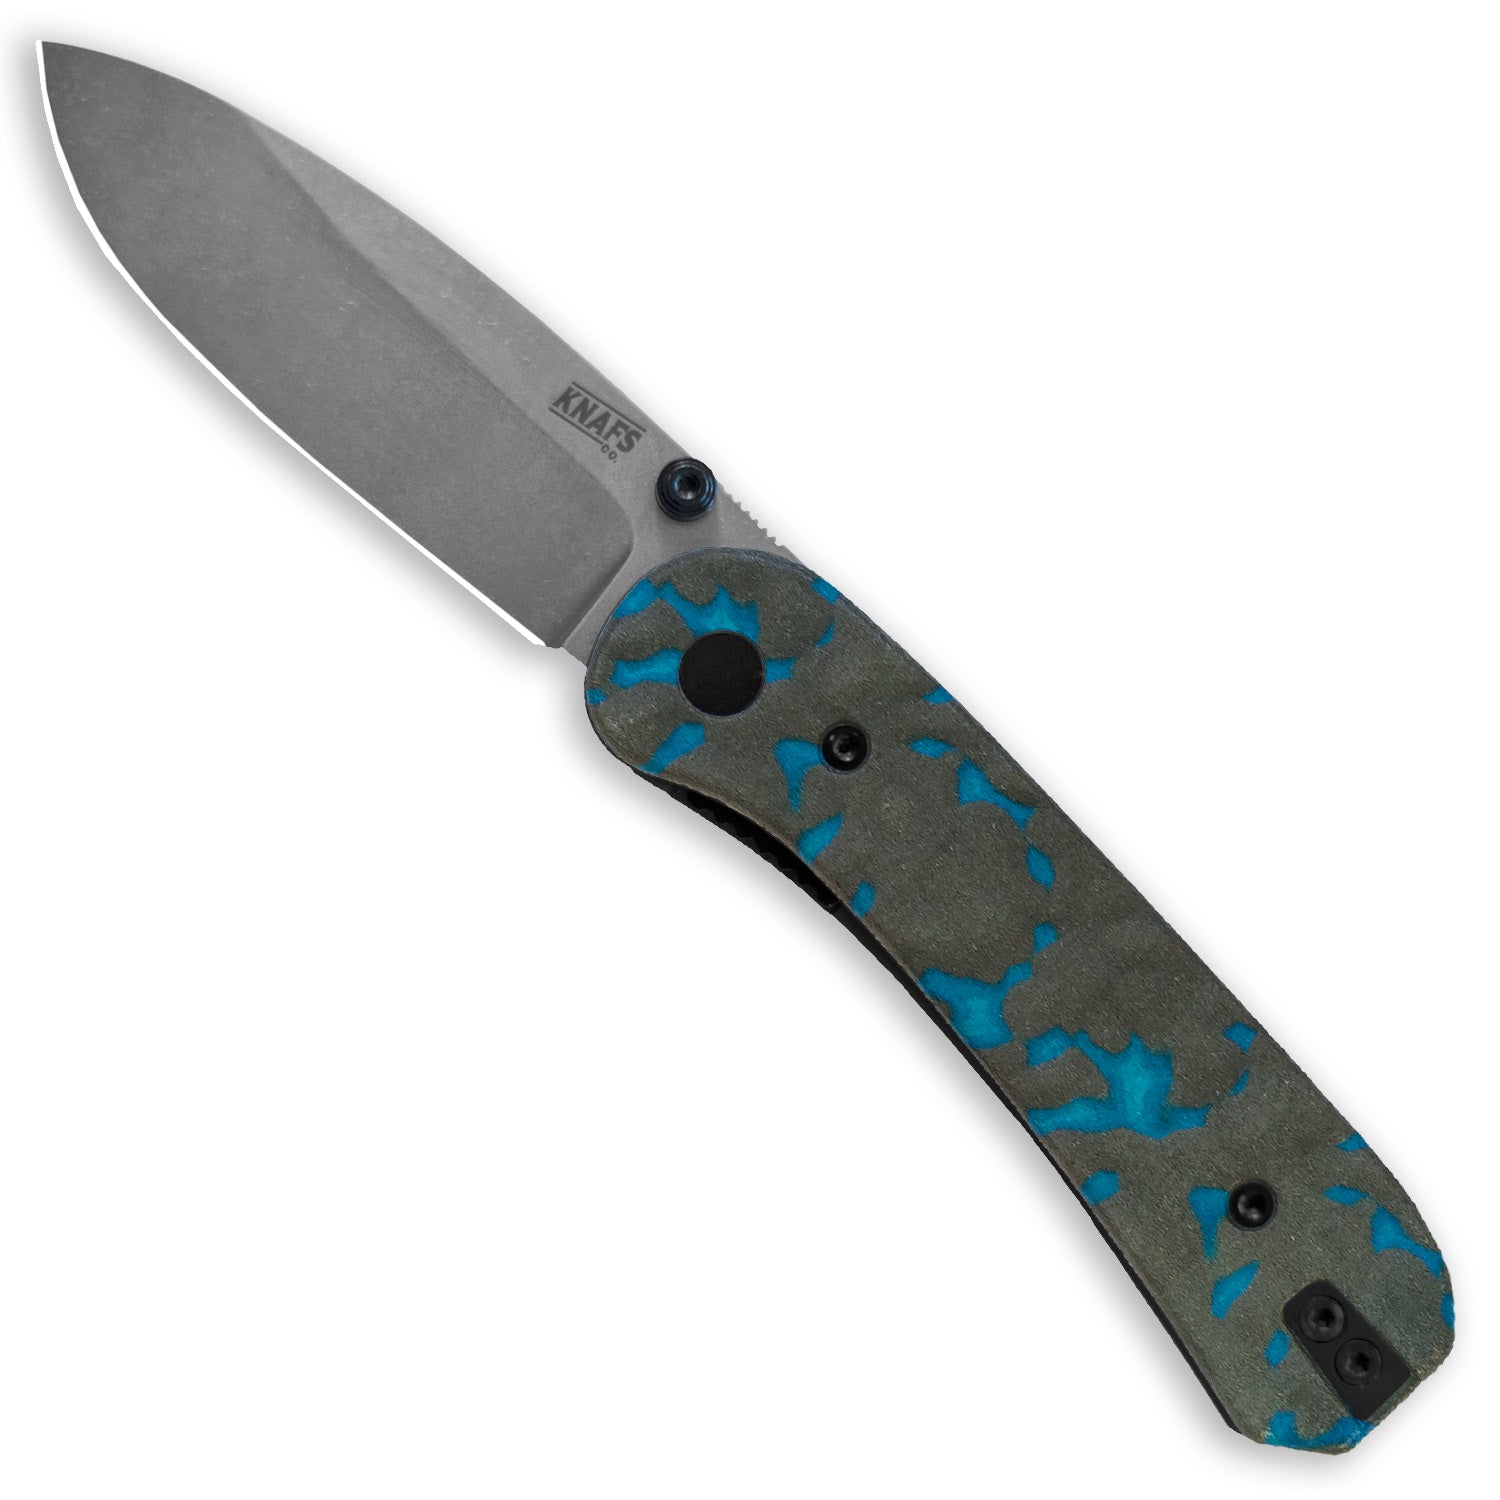 Lander 1 Knife Scales - Lava - Icy Blue